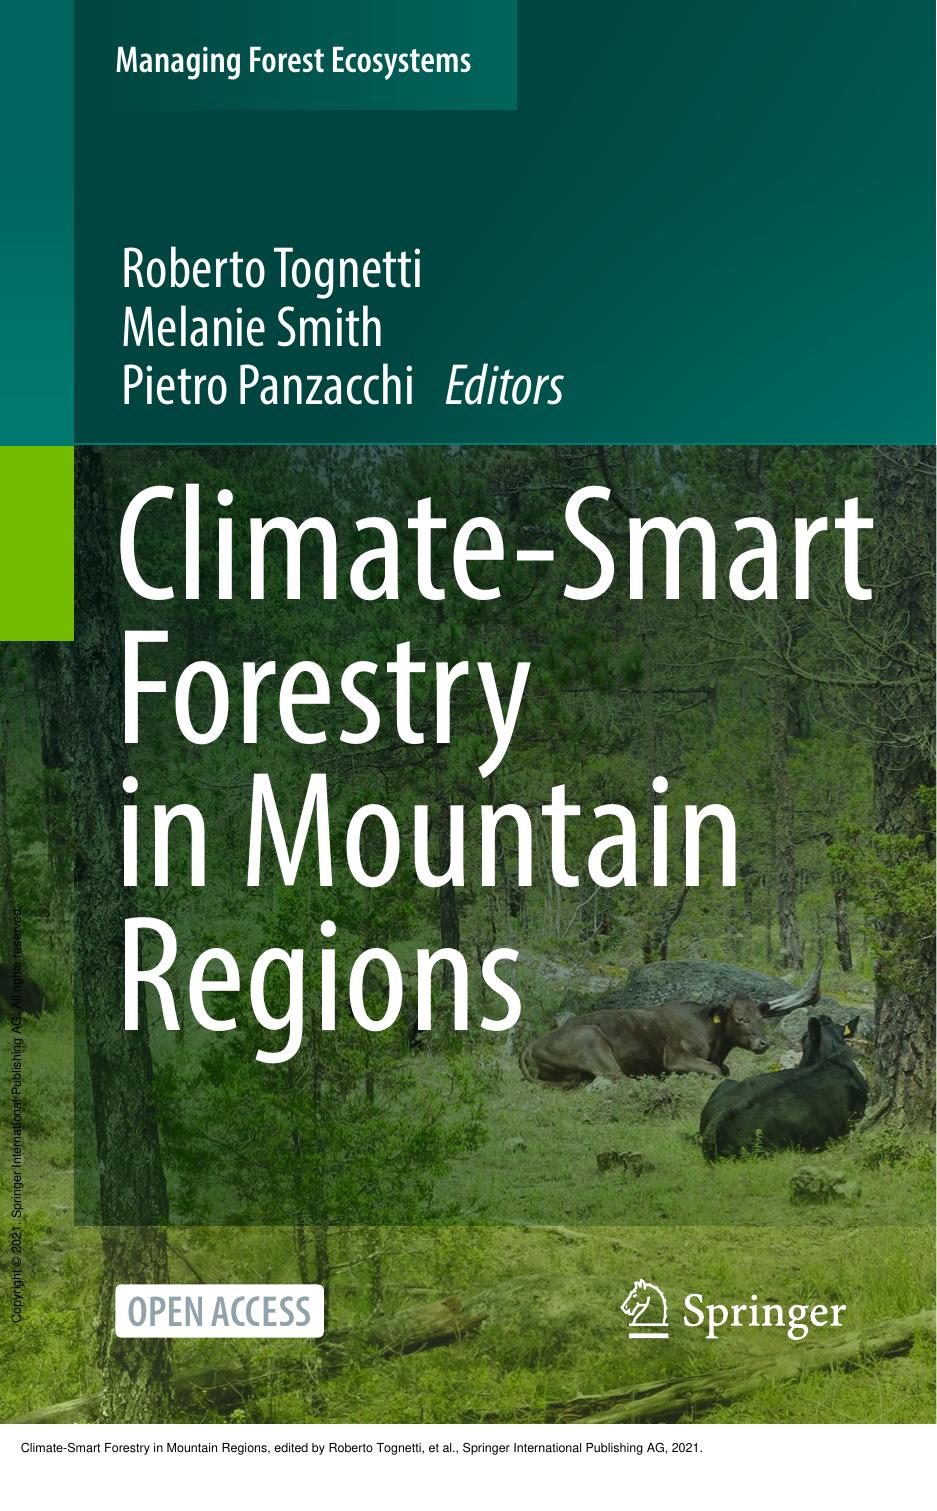 Climate-Smart Forestry in Mountain Regions by Roberto Tognetti; Melanie Smith; Pietro Panzacchi